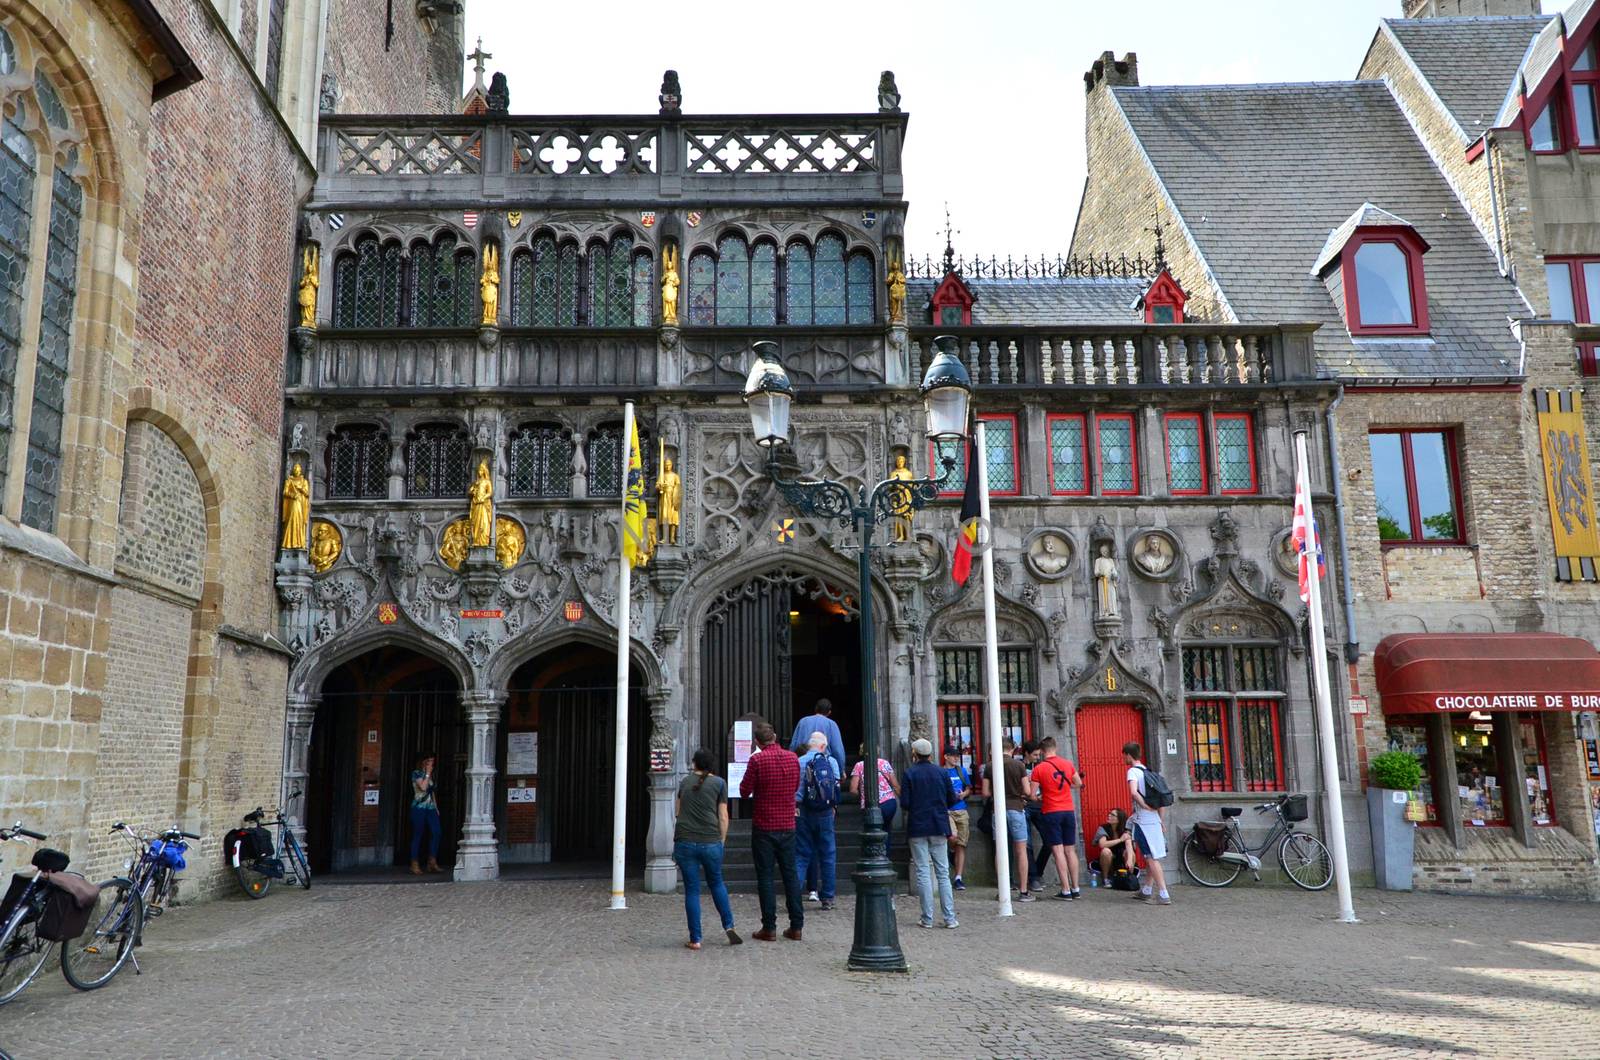 Bruges, Belgium - May 11, 2015: Tourist visit Basilica of the Holy Blood in Bruges, Belgium on May 11, 2015. Basilica is located in the Burg square and consists of a lower and upper chapel.